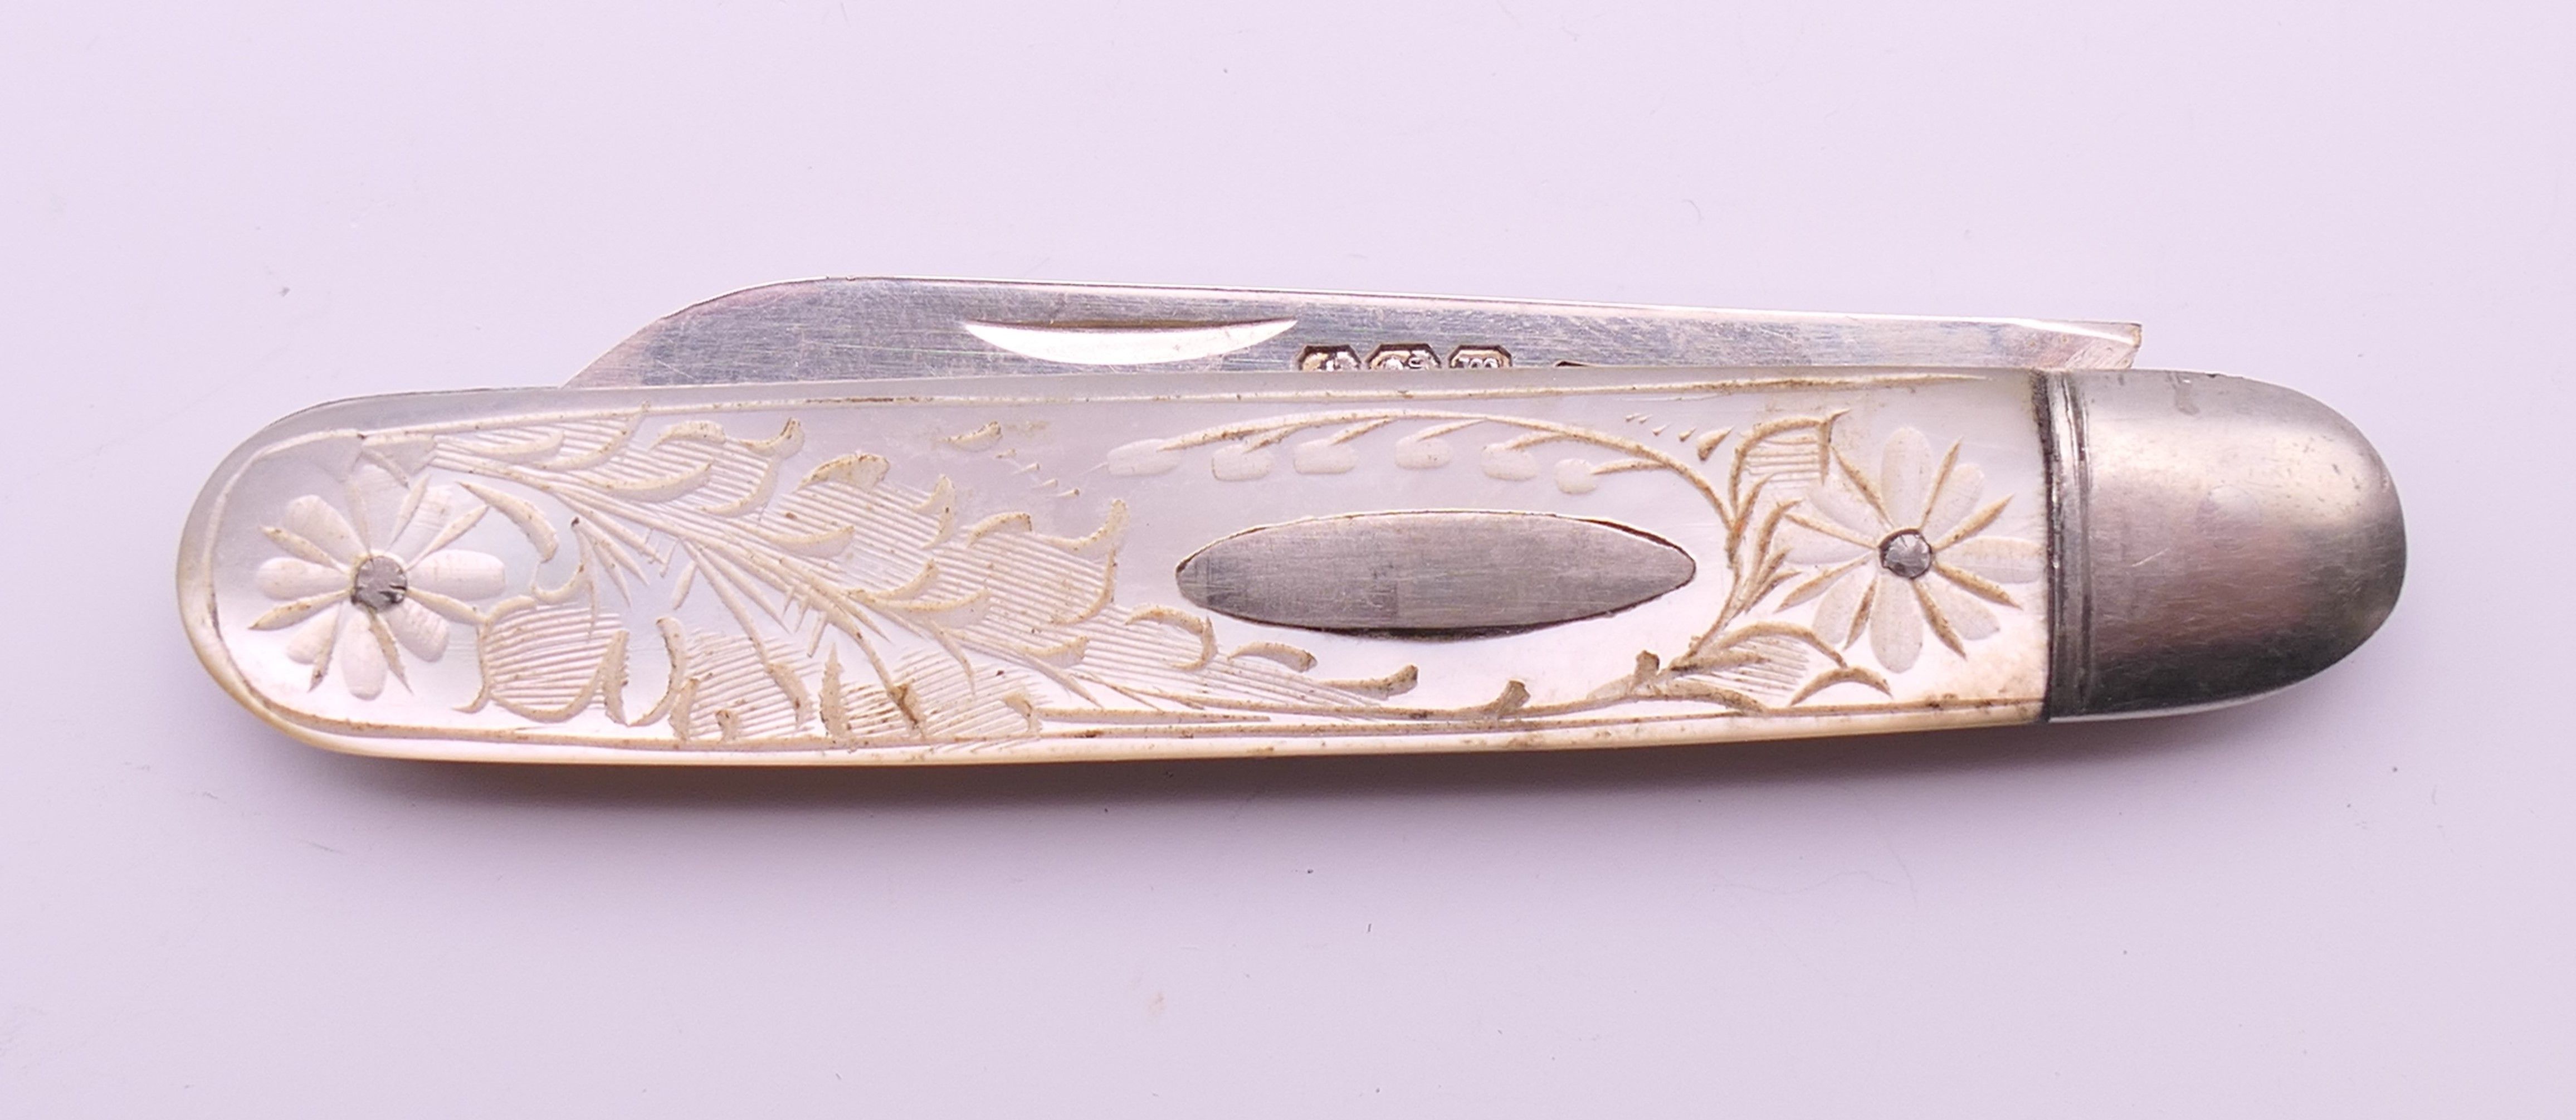 A silver and mother-of-pearl folding fruit knife (10.5 cm long extended) and a match holder. - Image 3 of 6